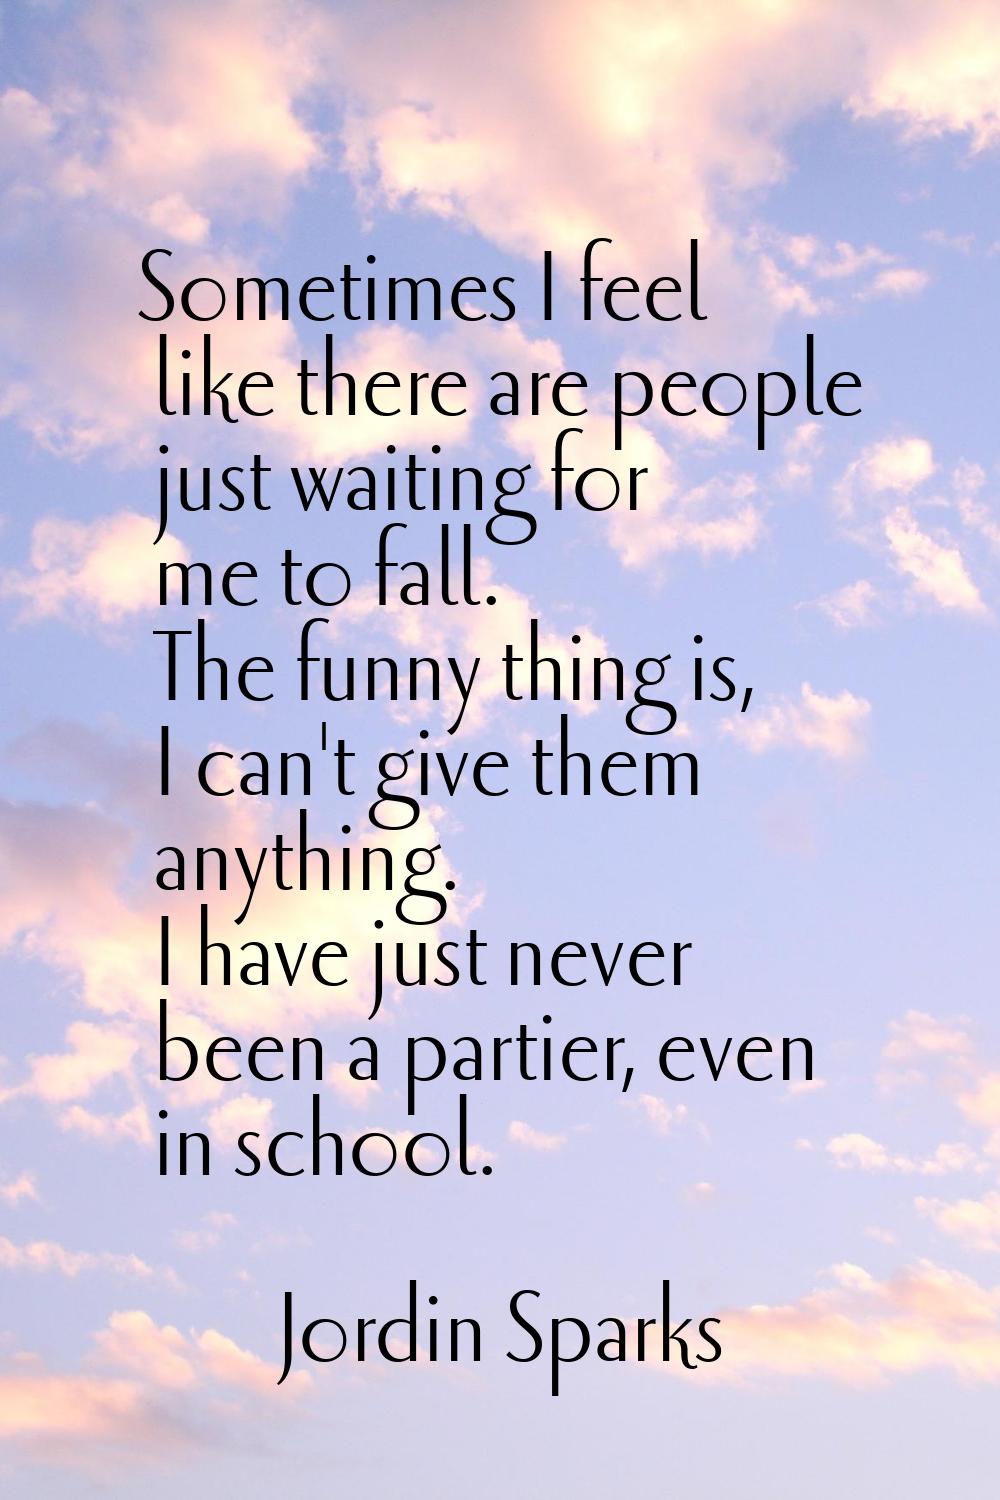 Sometimes I feel like there are people just waiting for me to fall. The funny thing is, I can't giv